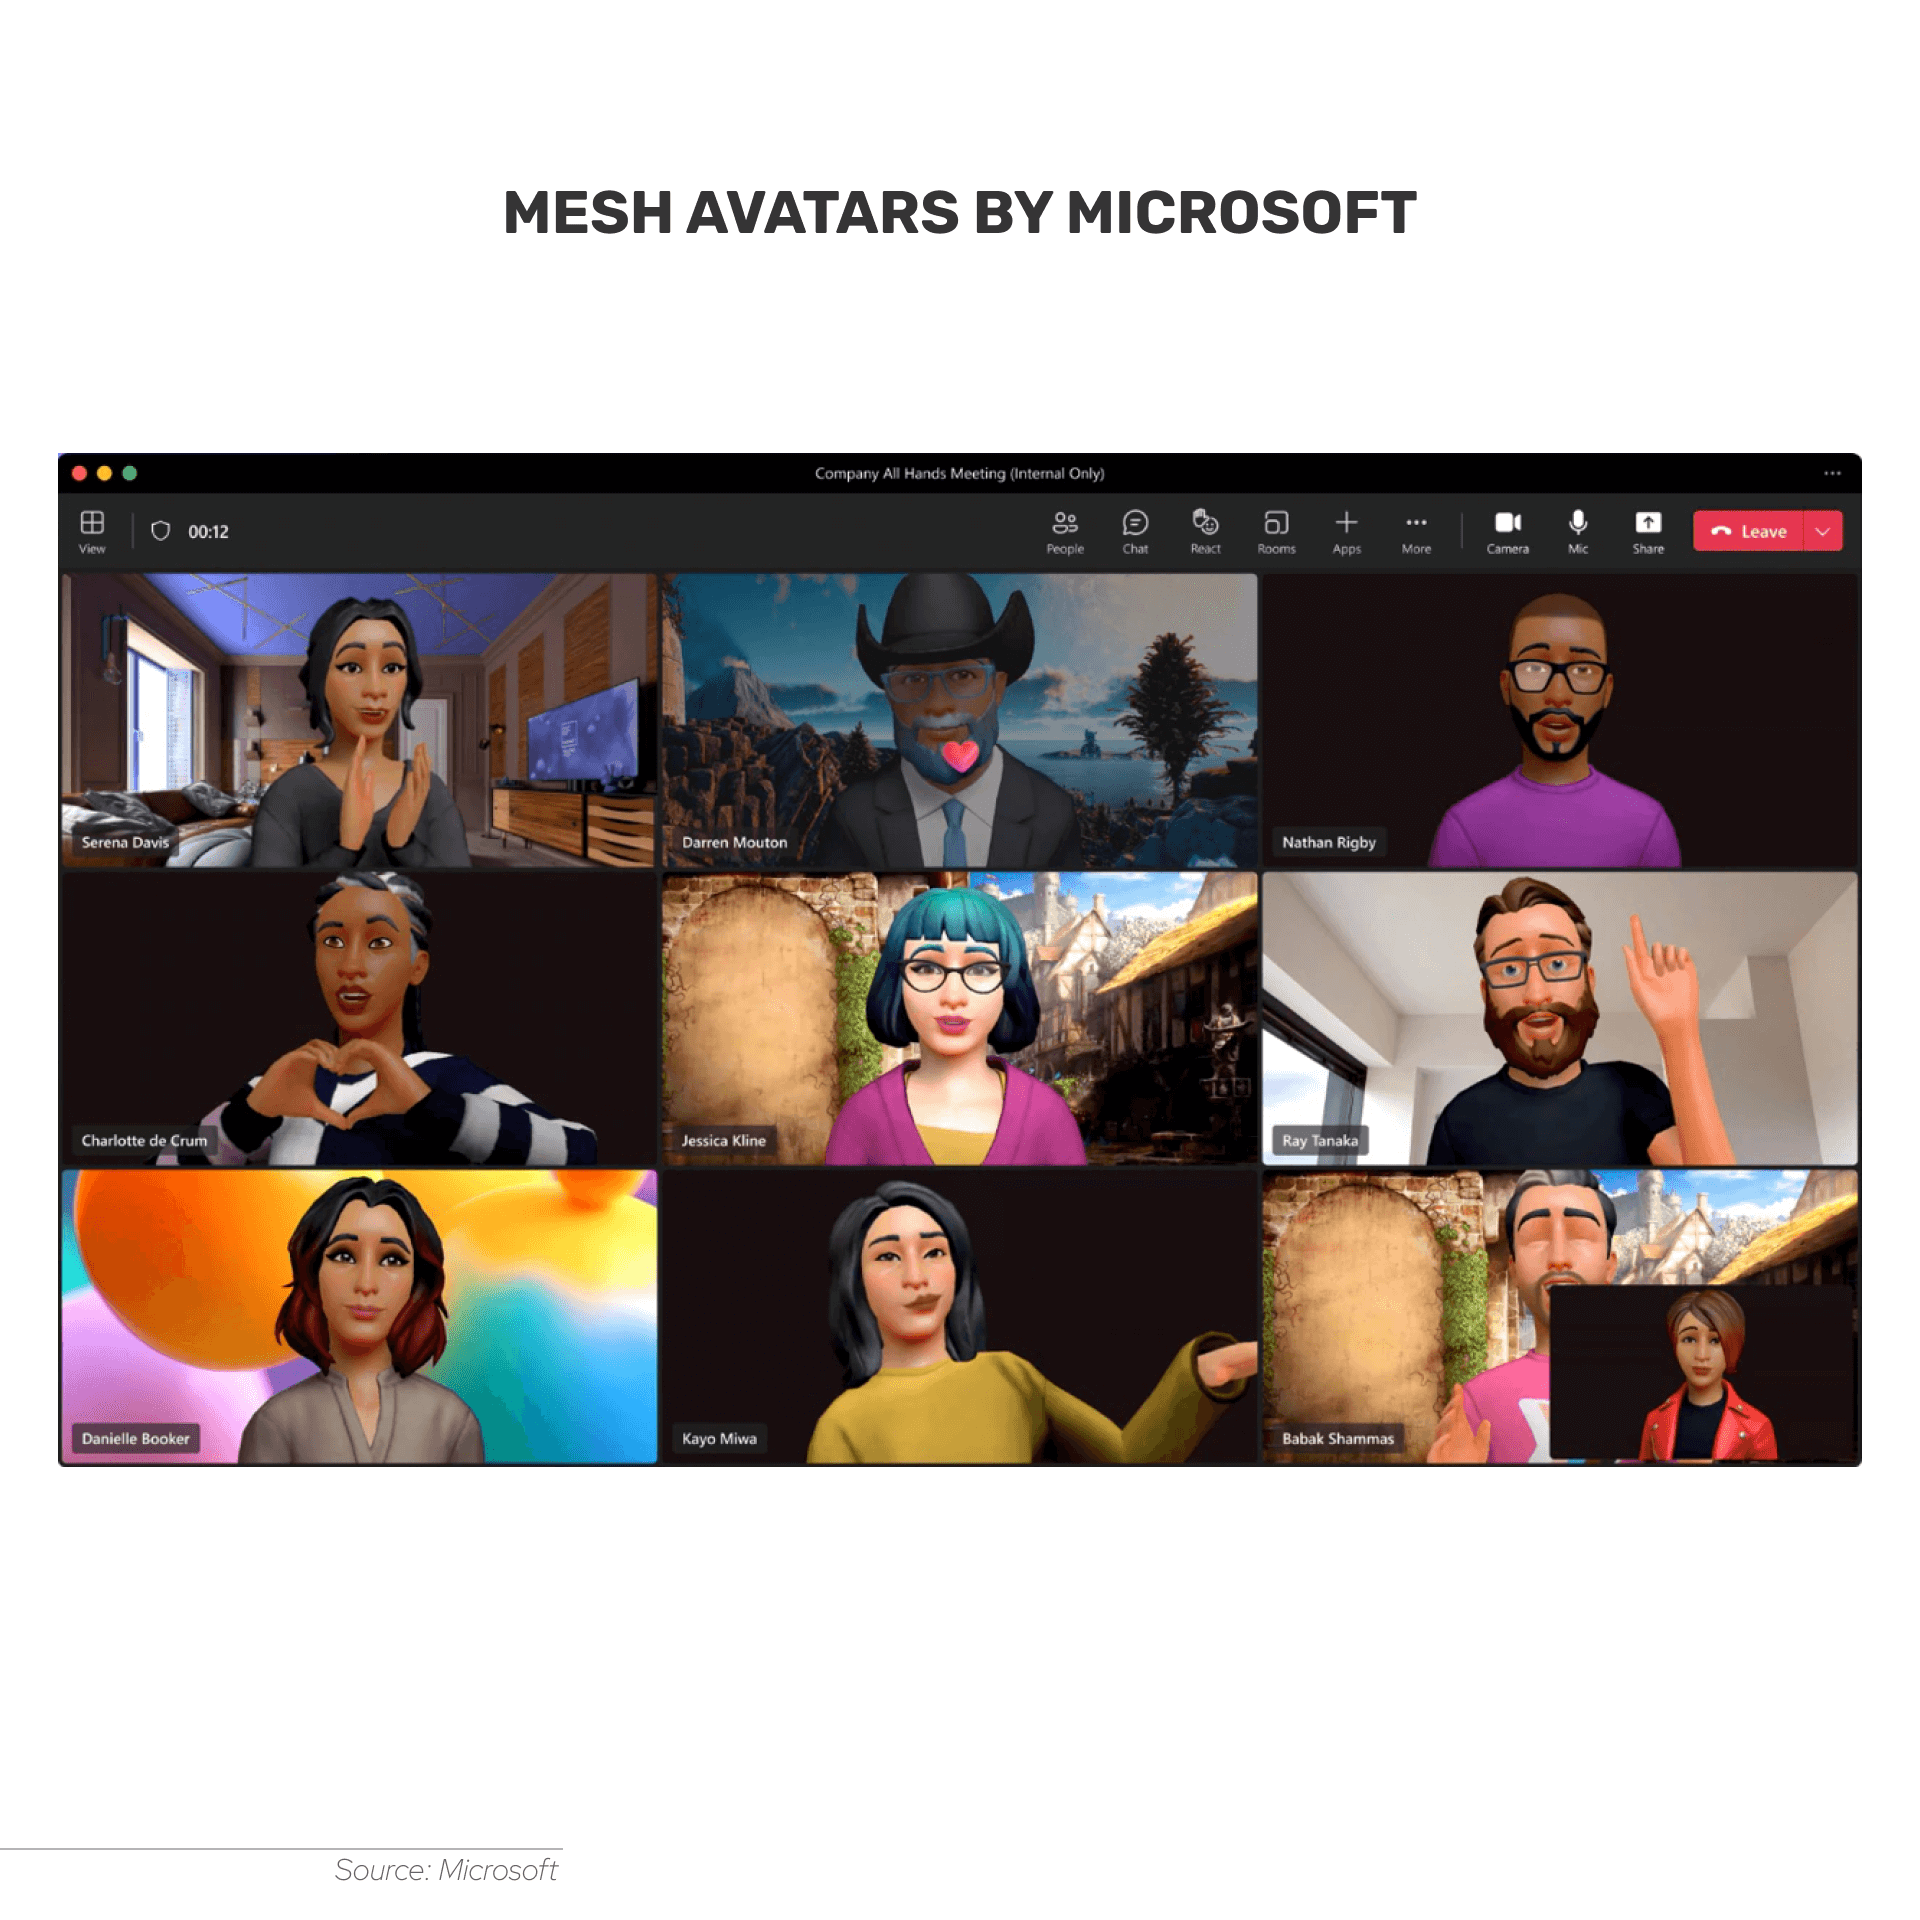 Microsoft launched Mesh avatars for Microsoft Teams that allow employees to create multiple avatar versions for different kinds of meetings.